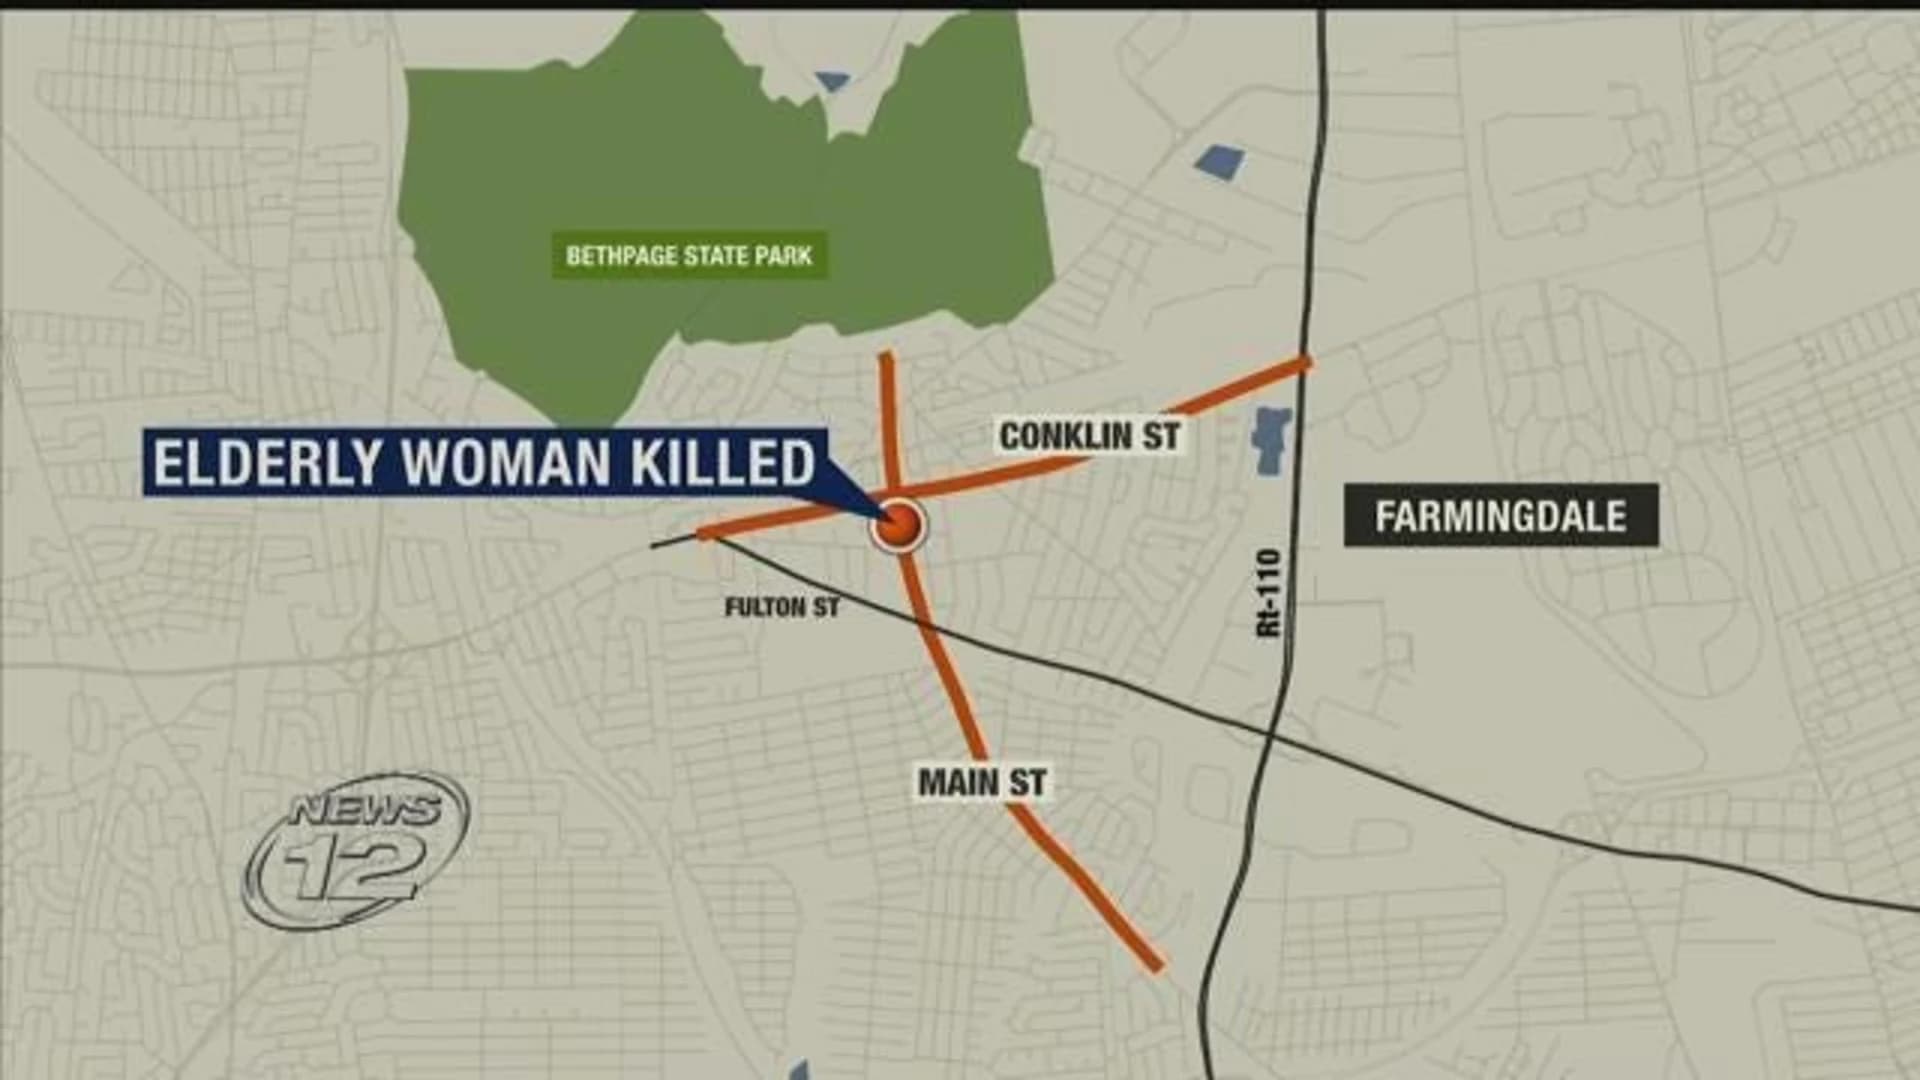 92-year-old woman fatally struck by SUV in Farmingdale